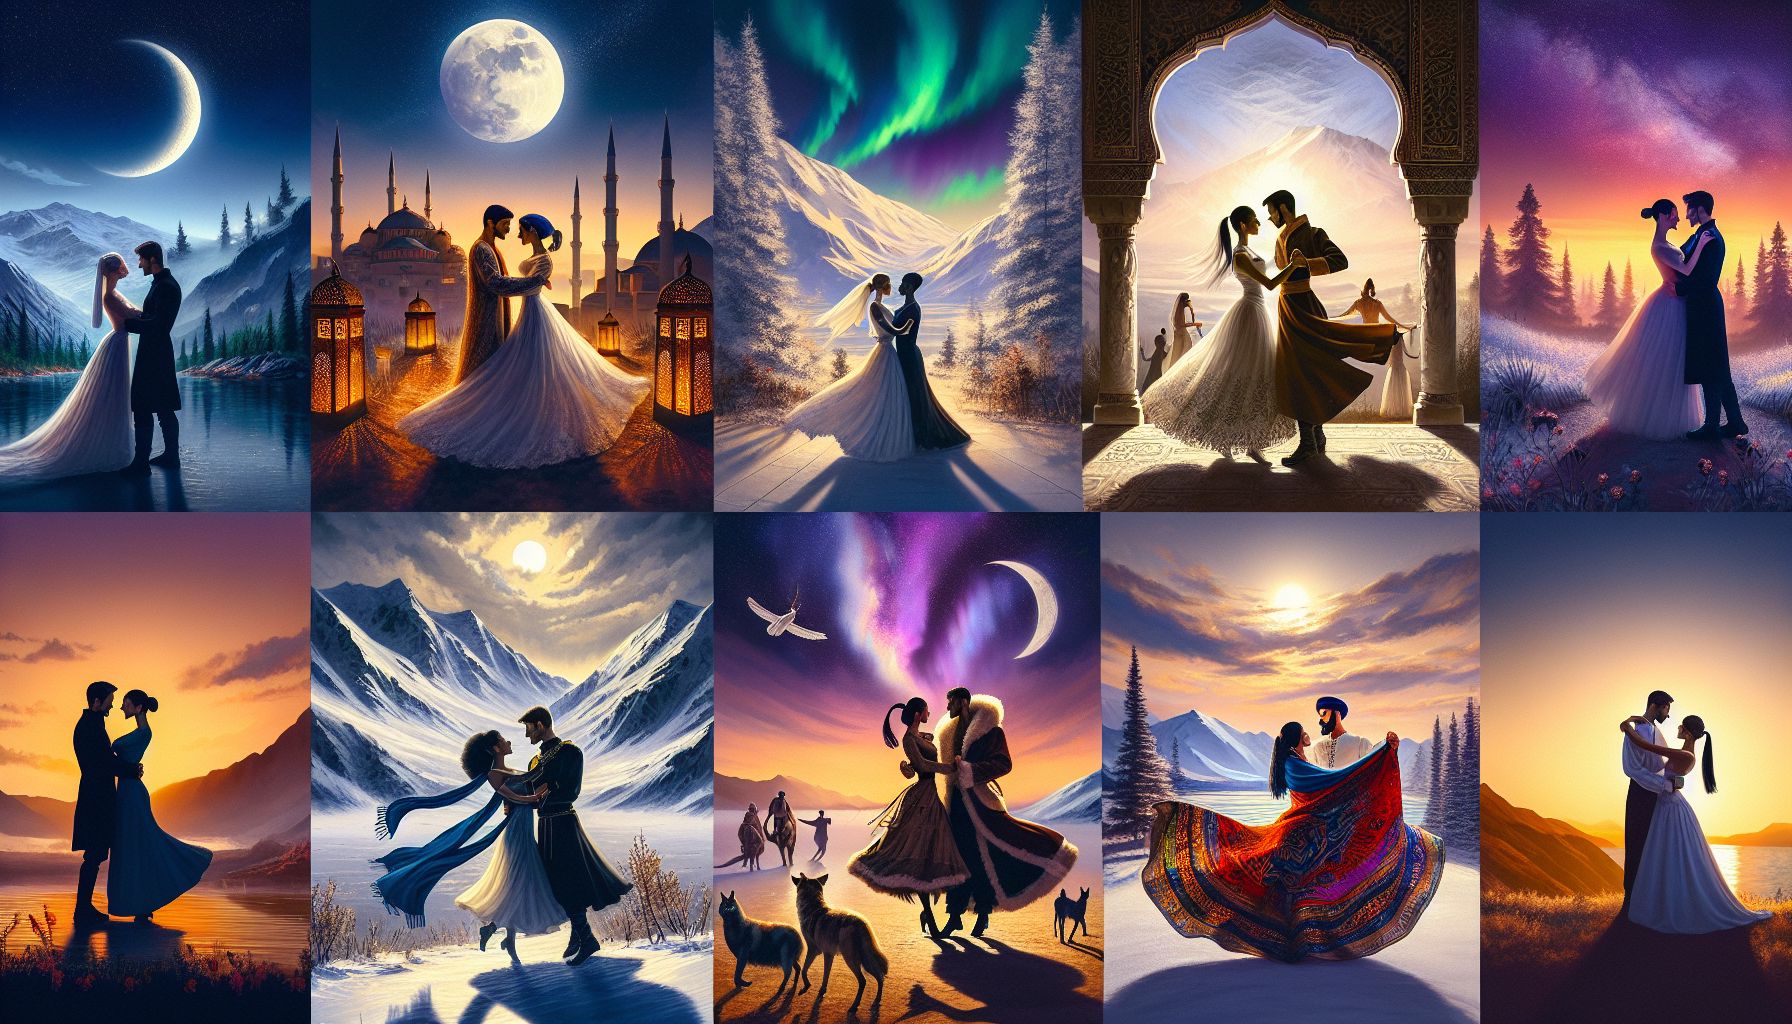 The Enchanting Dance of Love: A Journey through the World’s Most Romantic Places